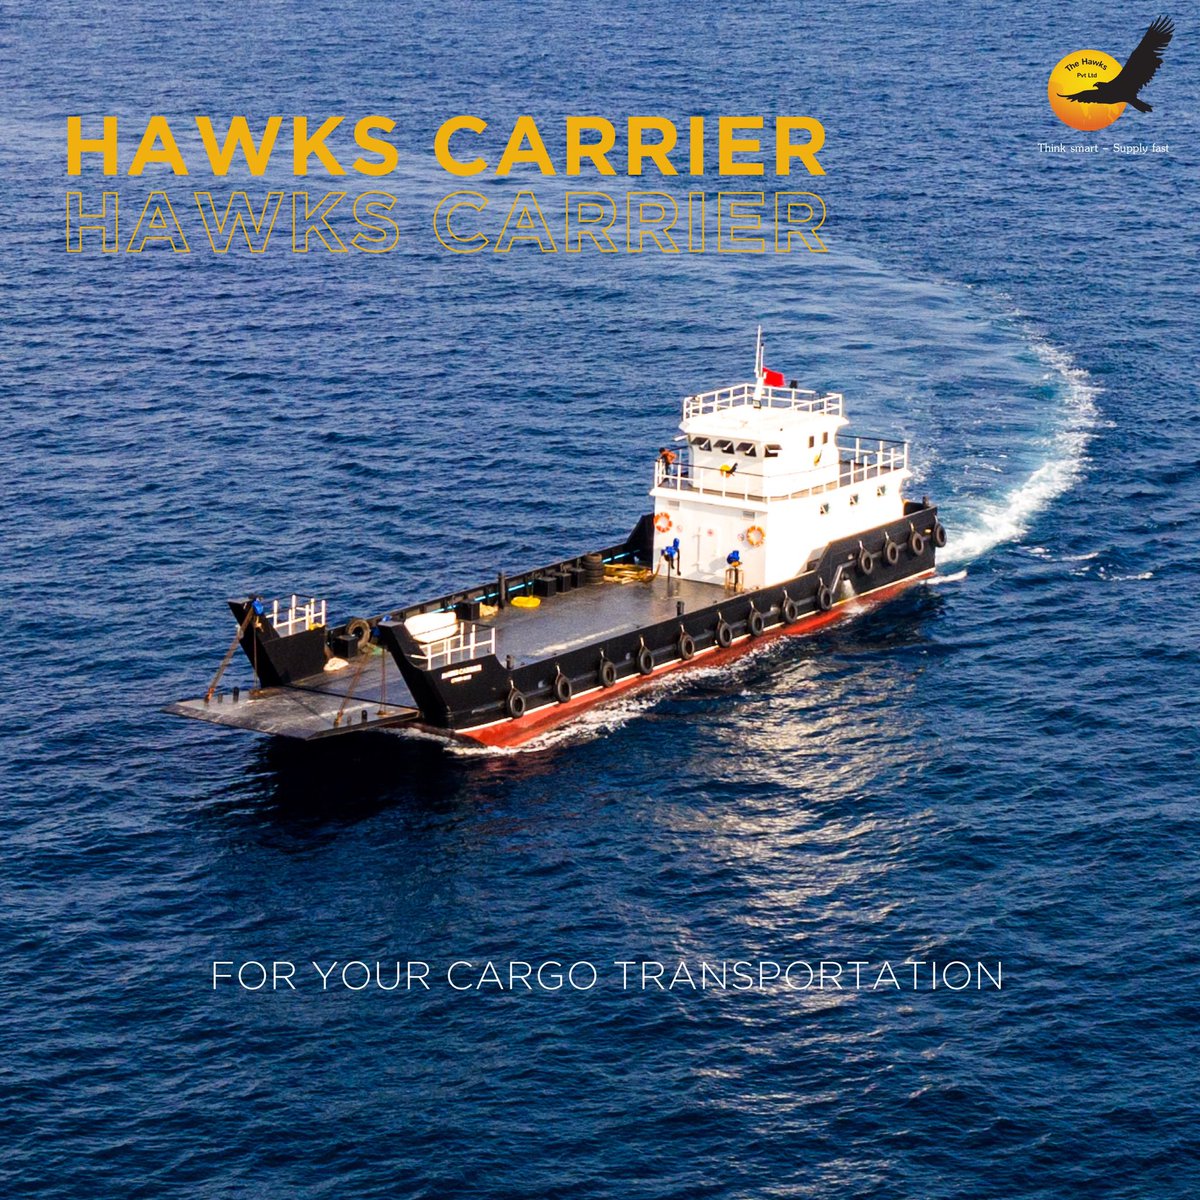 Hawks Carrier

For your cargo transportation. 

#thehawkspvt #hawkscarrier #transportsolutions #cargo #landingcraft #maritime #maldives